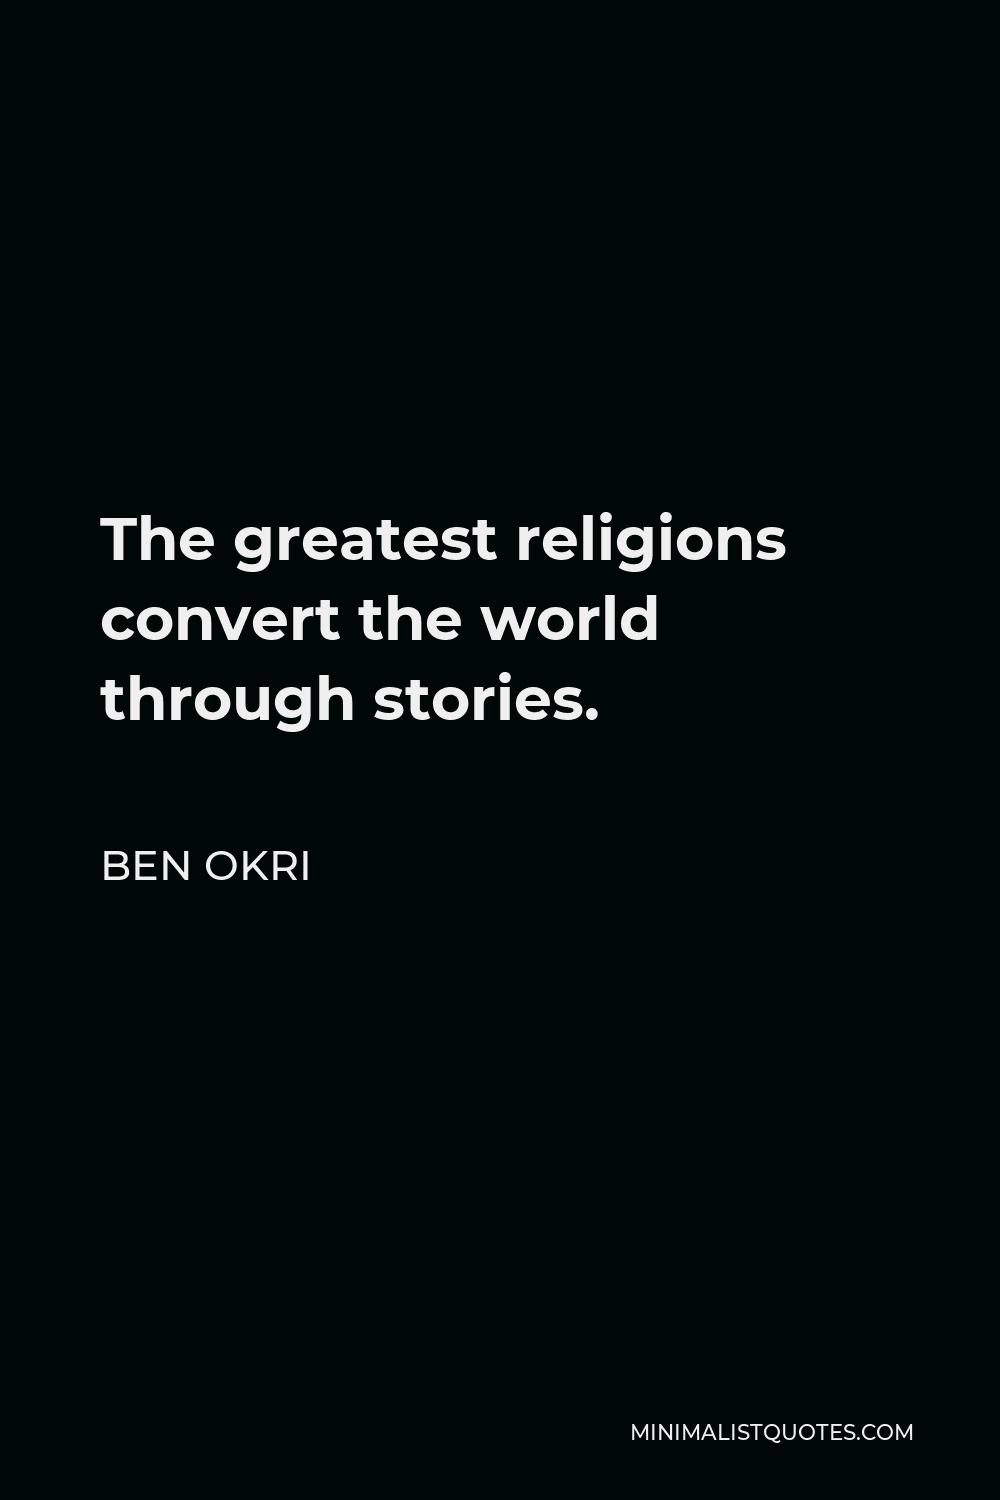 Ben Okri Quote - The greatest religions convert the world through stories.